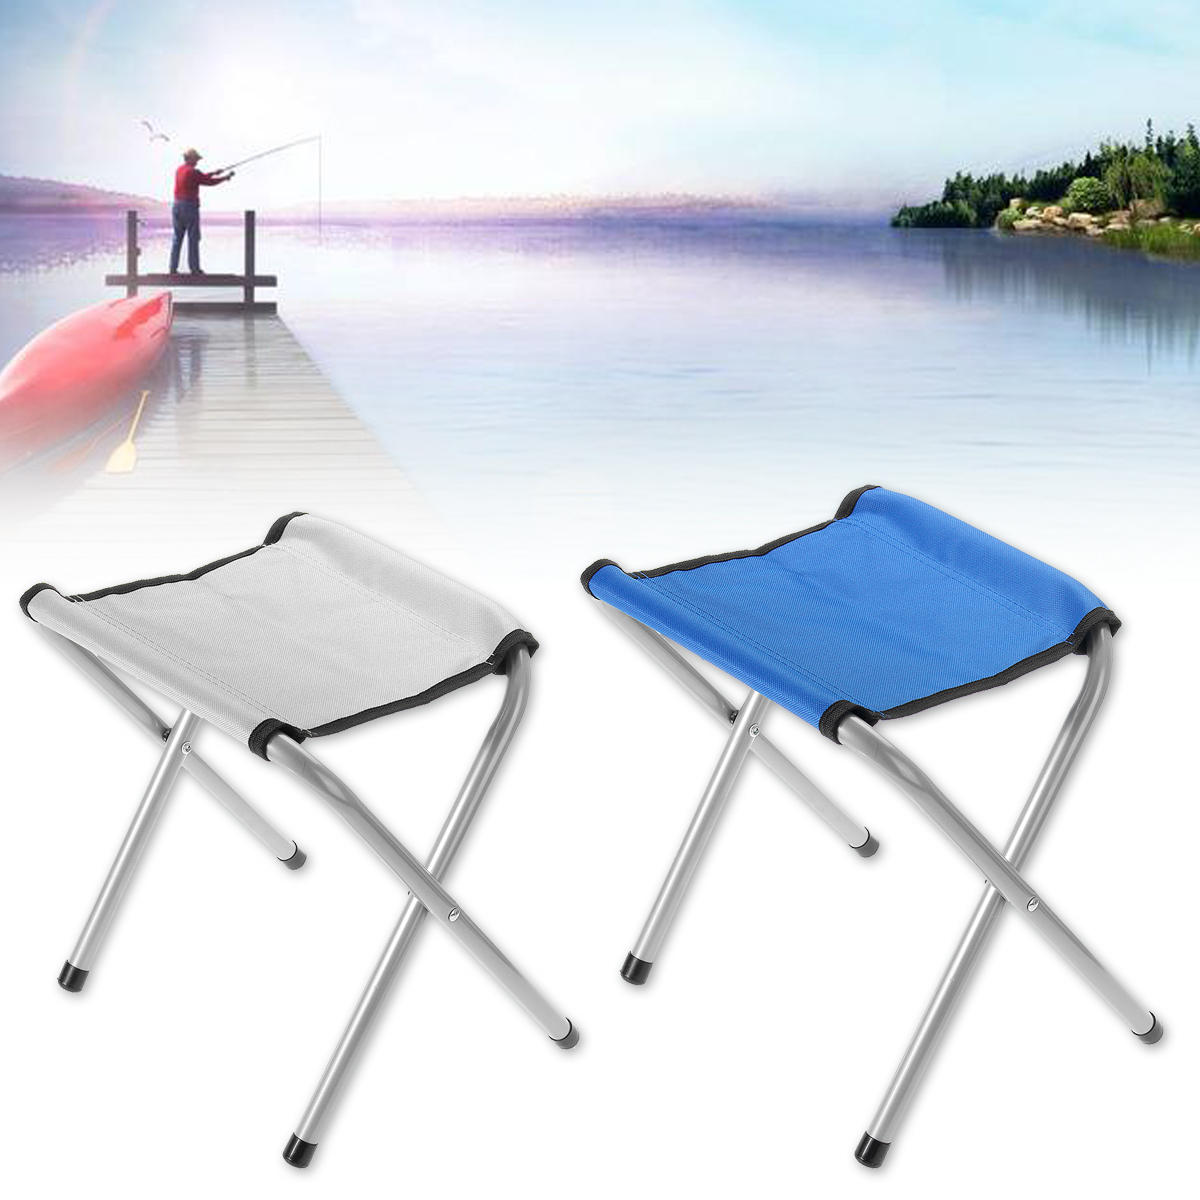 35cm Portable Outdoor Folding Chair Outdoor Traveling Hiking